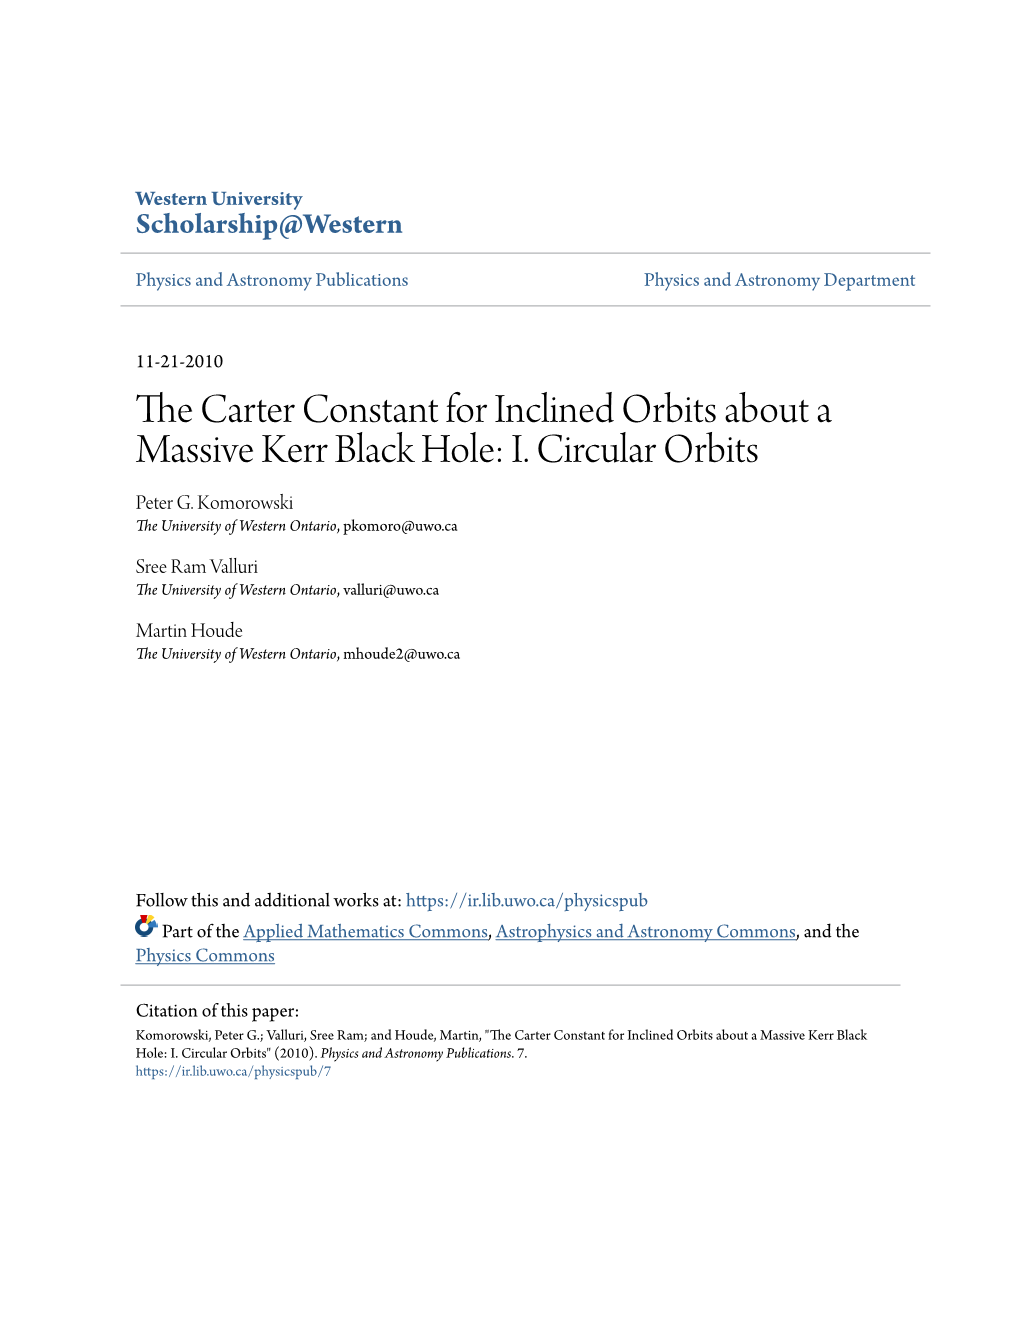 The Carter Constant for Inclined Orbits About a Massive Kerr Black Hole: I